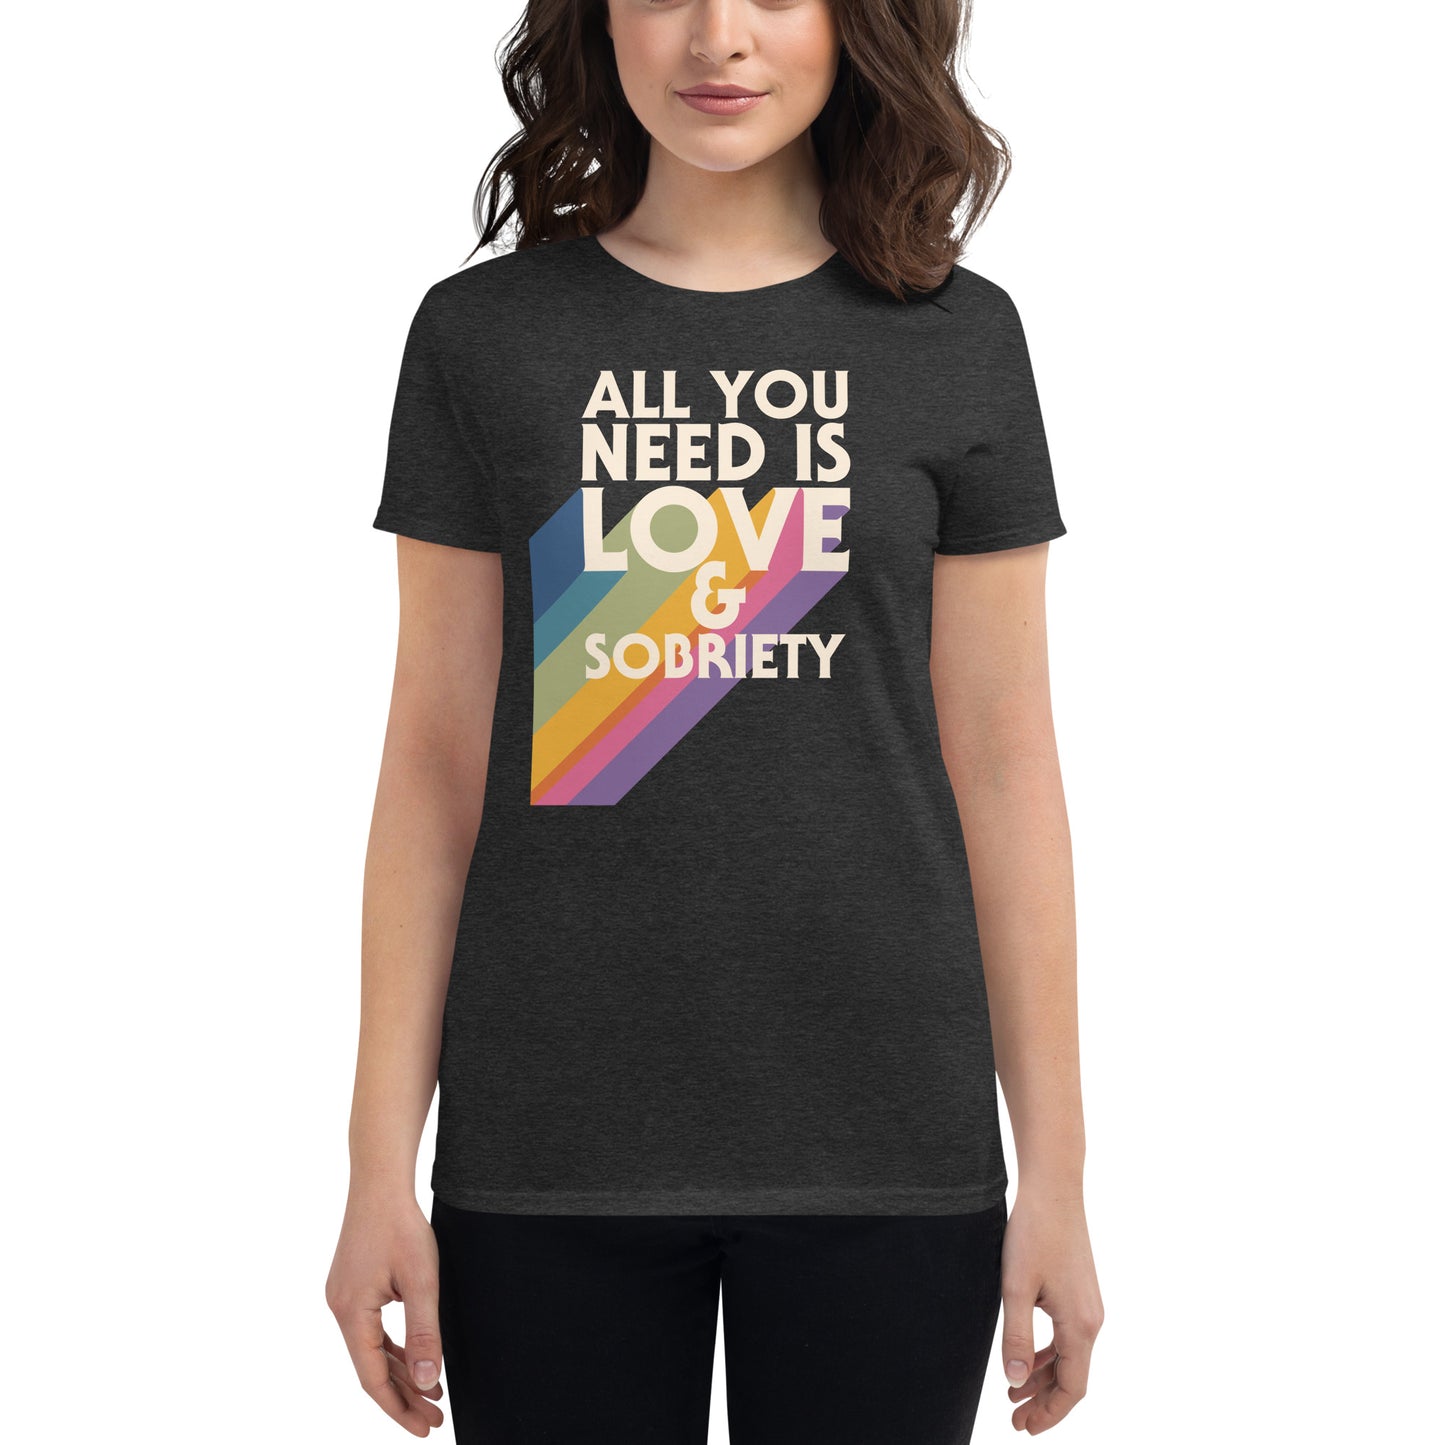 I Love Recovery - All You Need Is Love Light - Women's short sleeve t-shirt